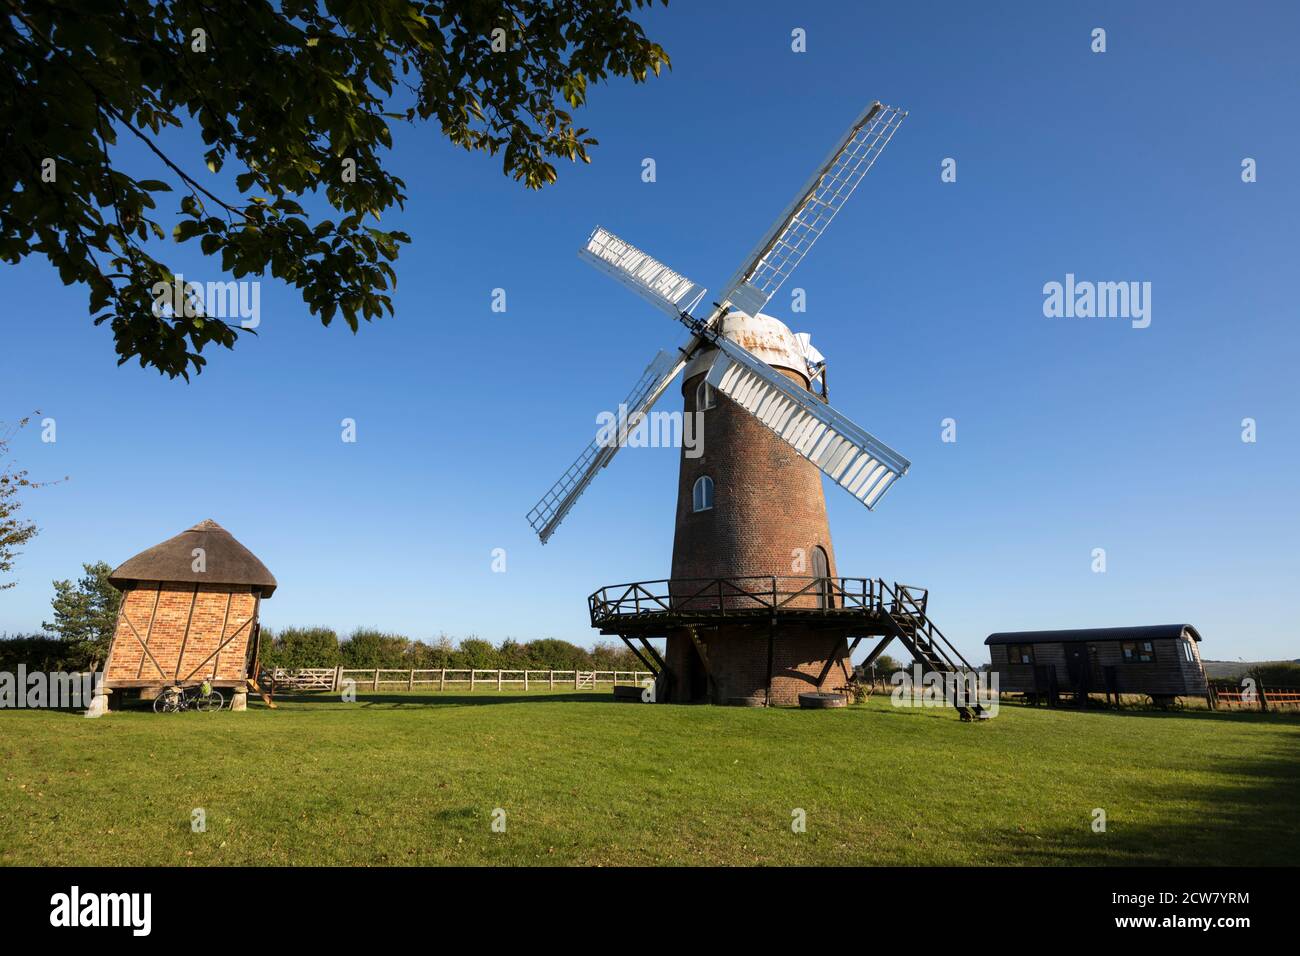 Wilton Windmill, Wilton, Wiltshire, Angleterre, Royaume-Uni, Europe Banque D'Images